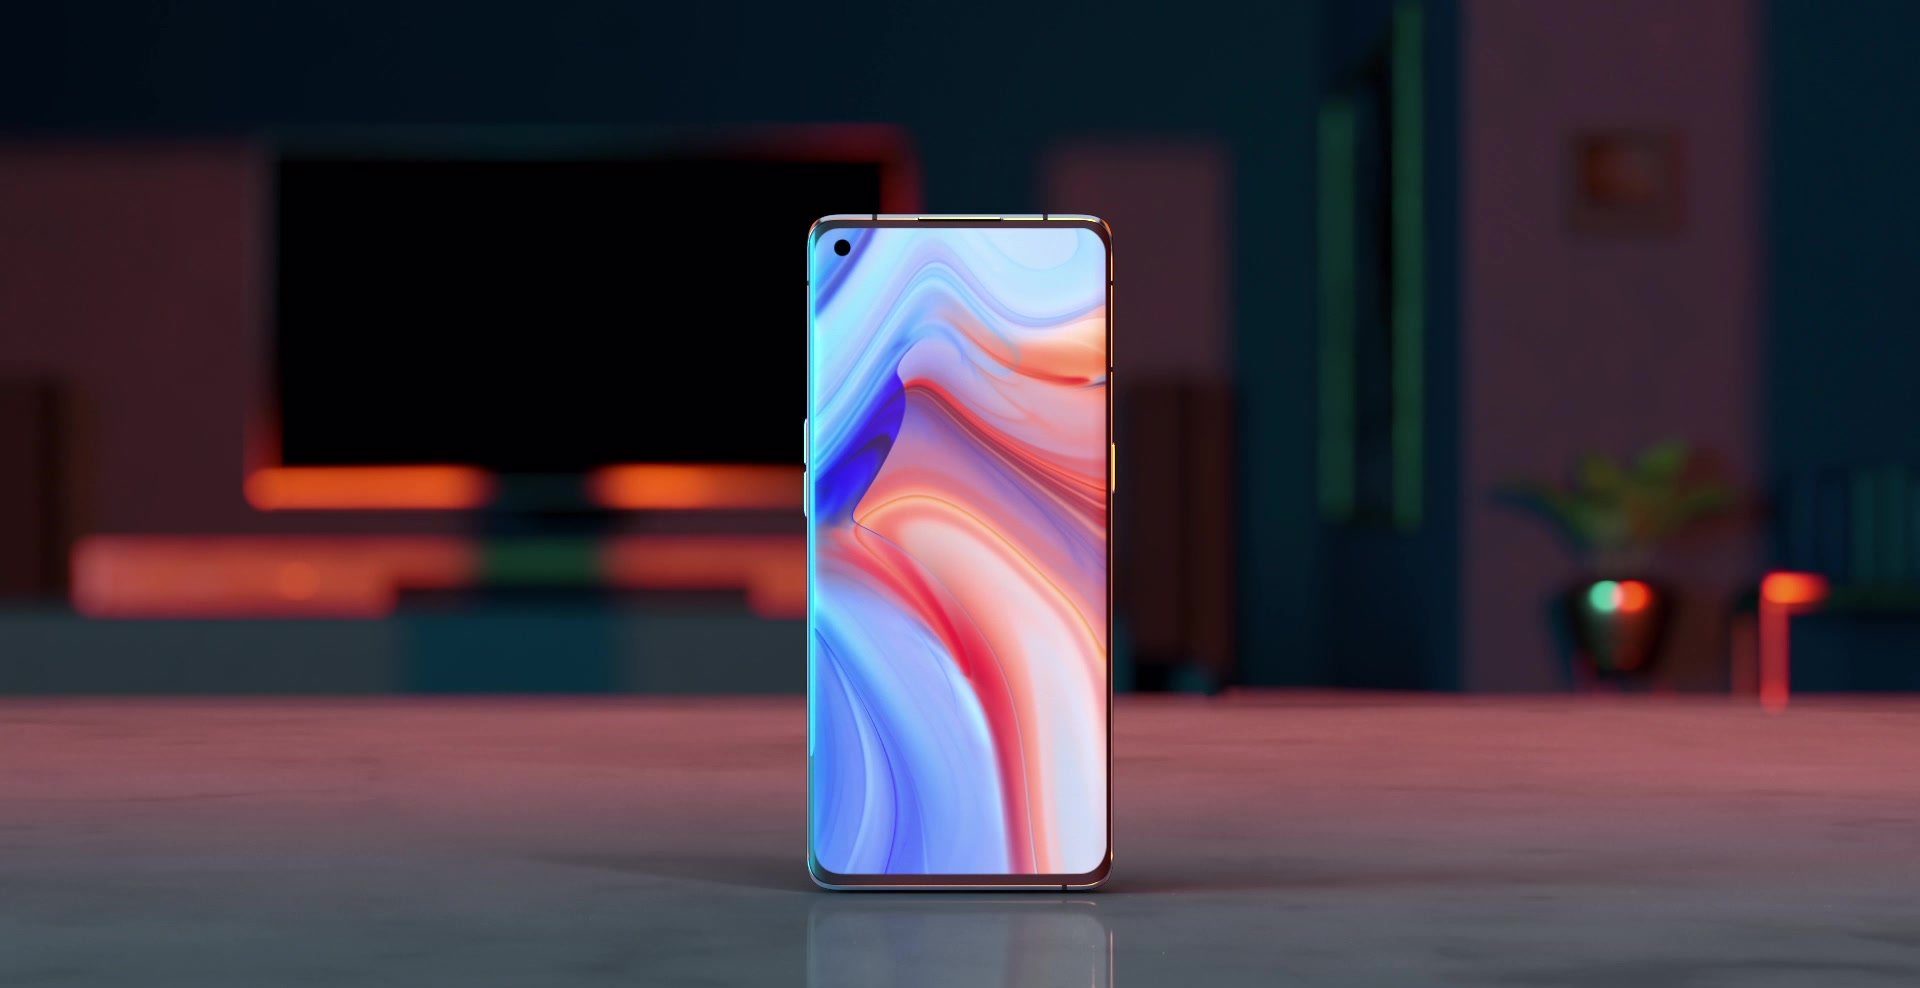 Review of new products Oppo Reno 4 and Reno 4 Pro with pros and cons